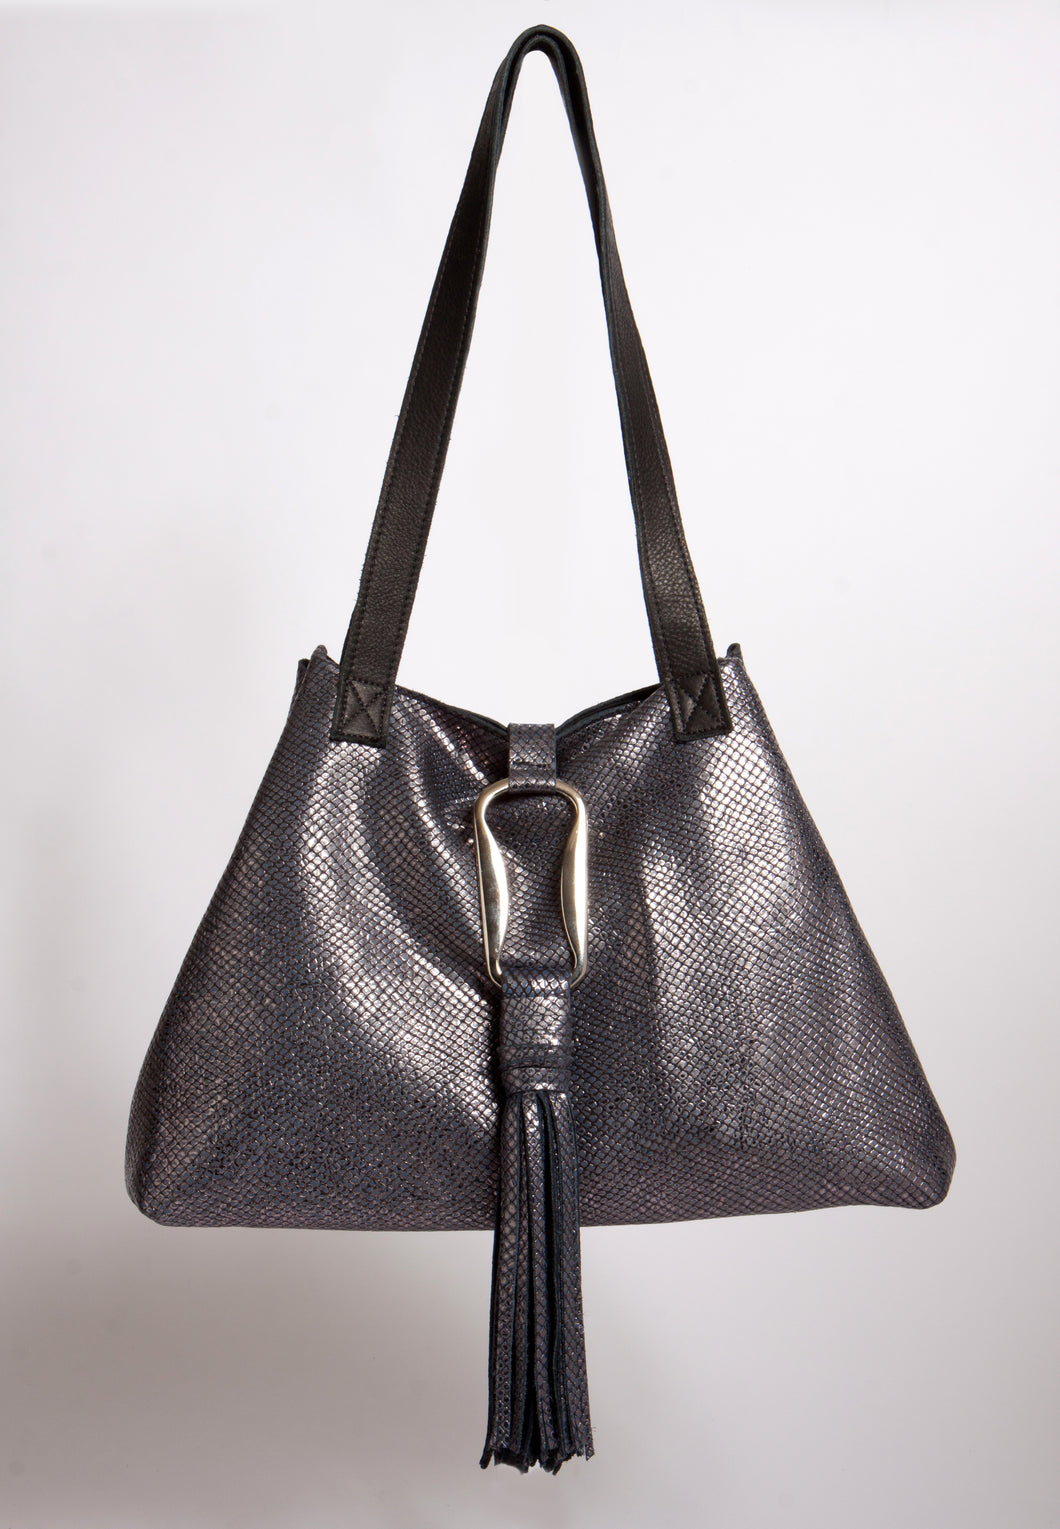 <b>Stacie</b><br> <p><font size=“3px”> Iridescent Black Tote With Metal Hardware </font></p>